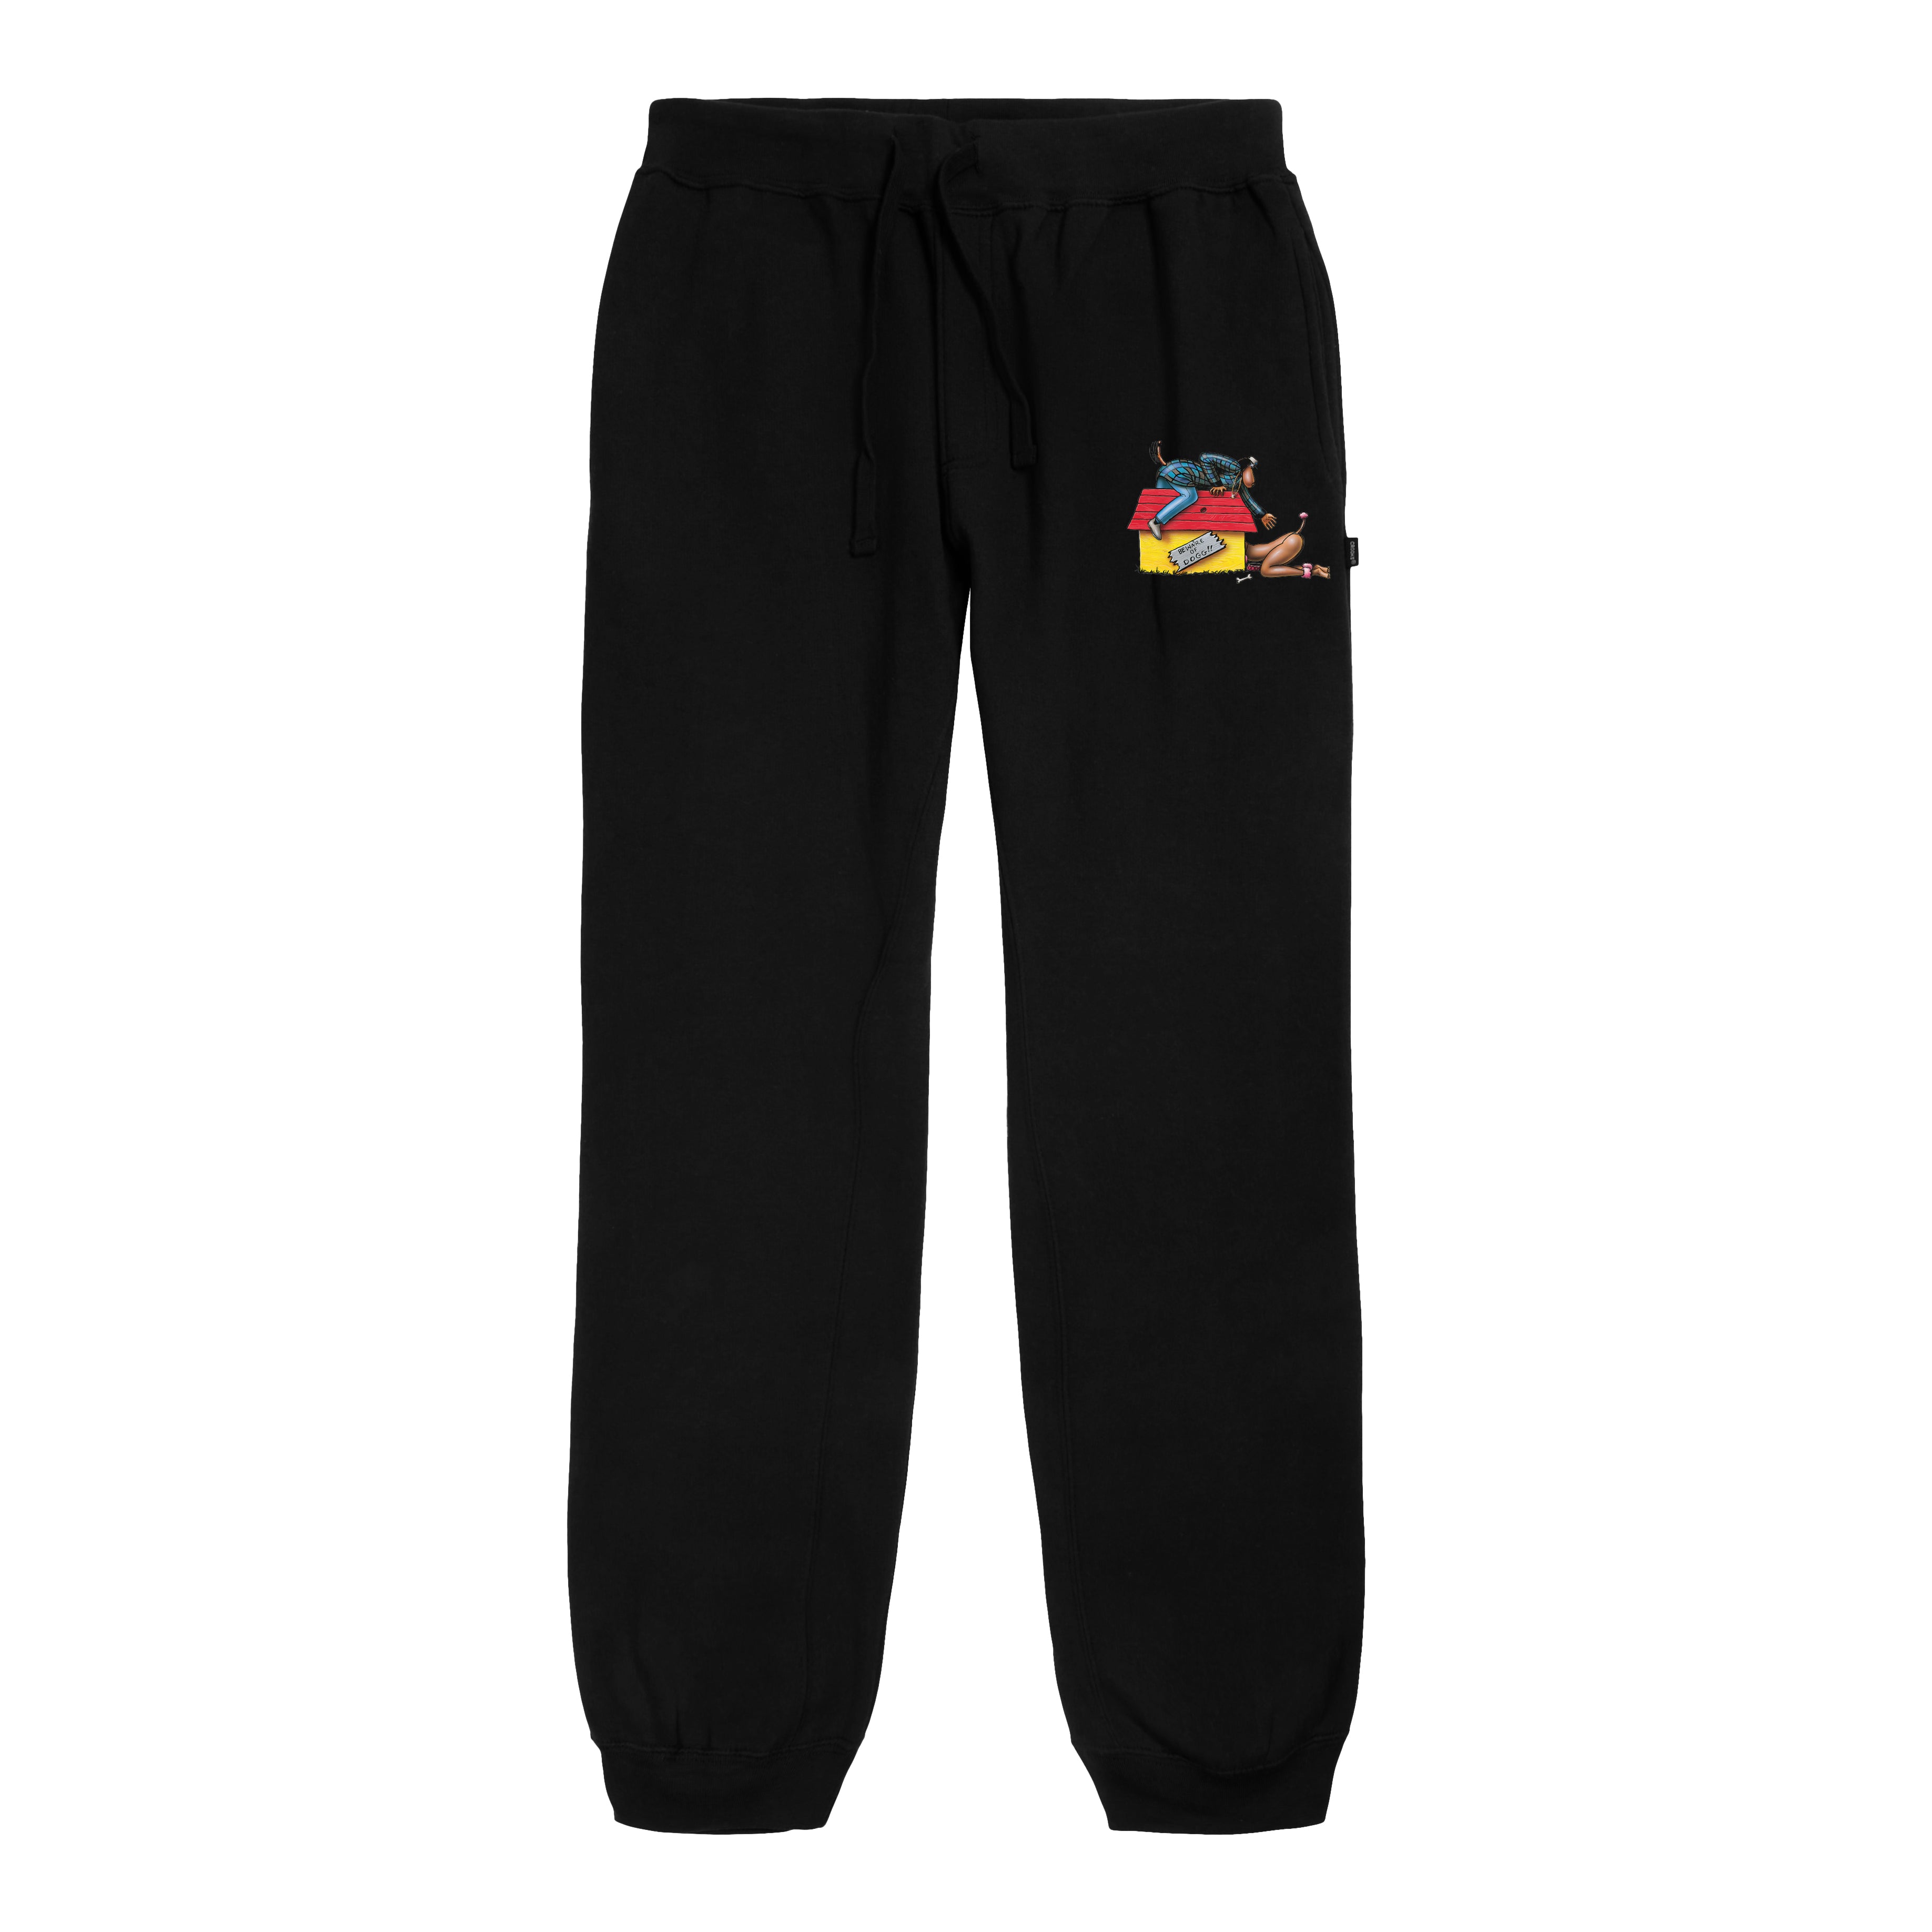 Snoop Doggy Dogg Doggystyle Joggers